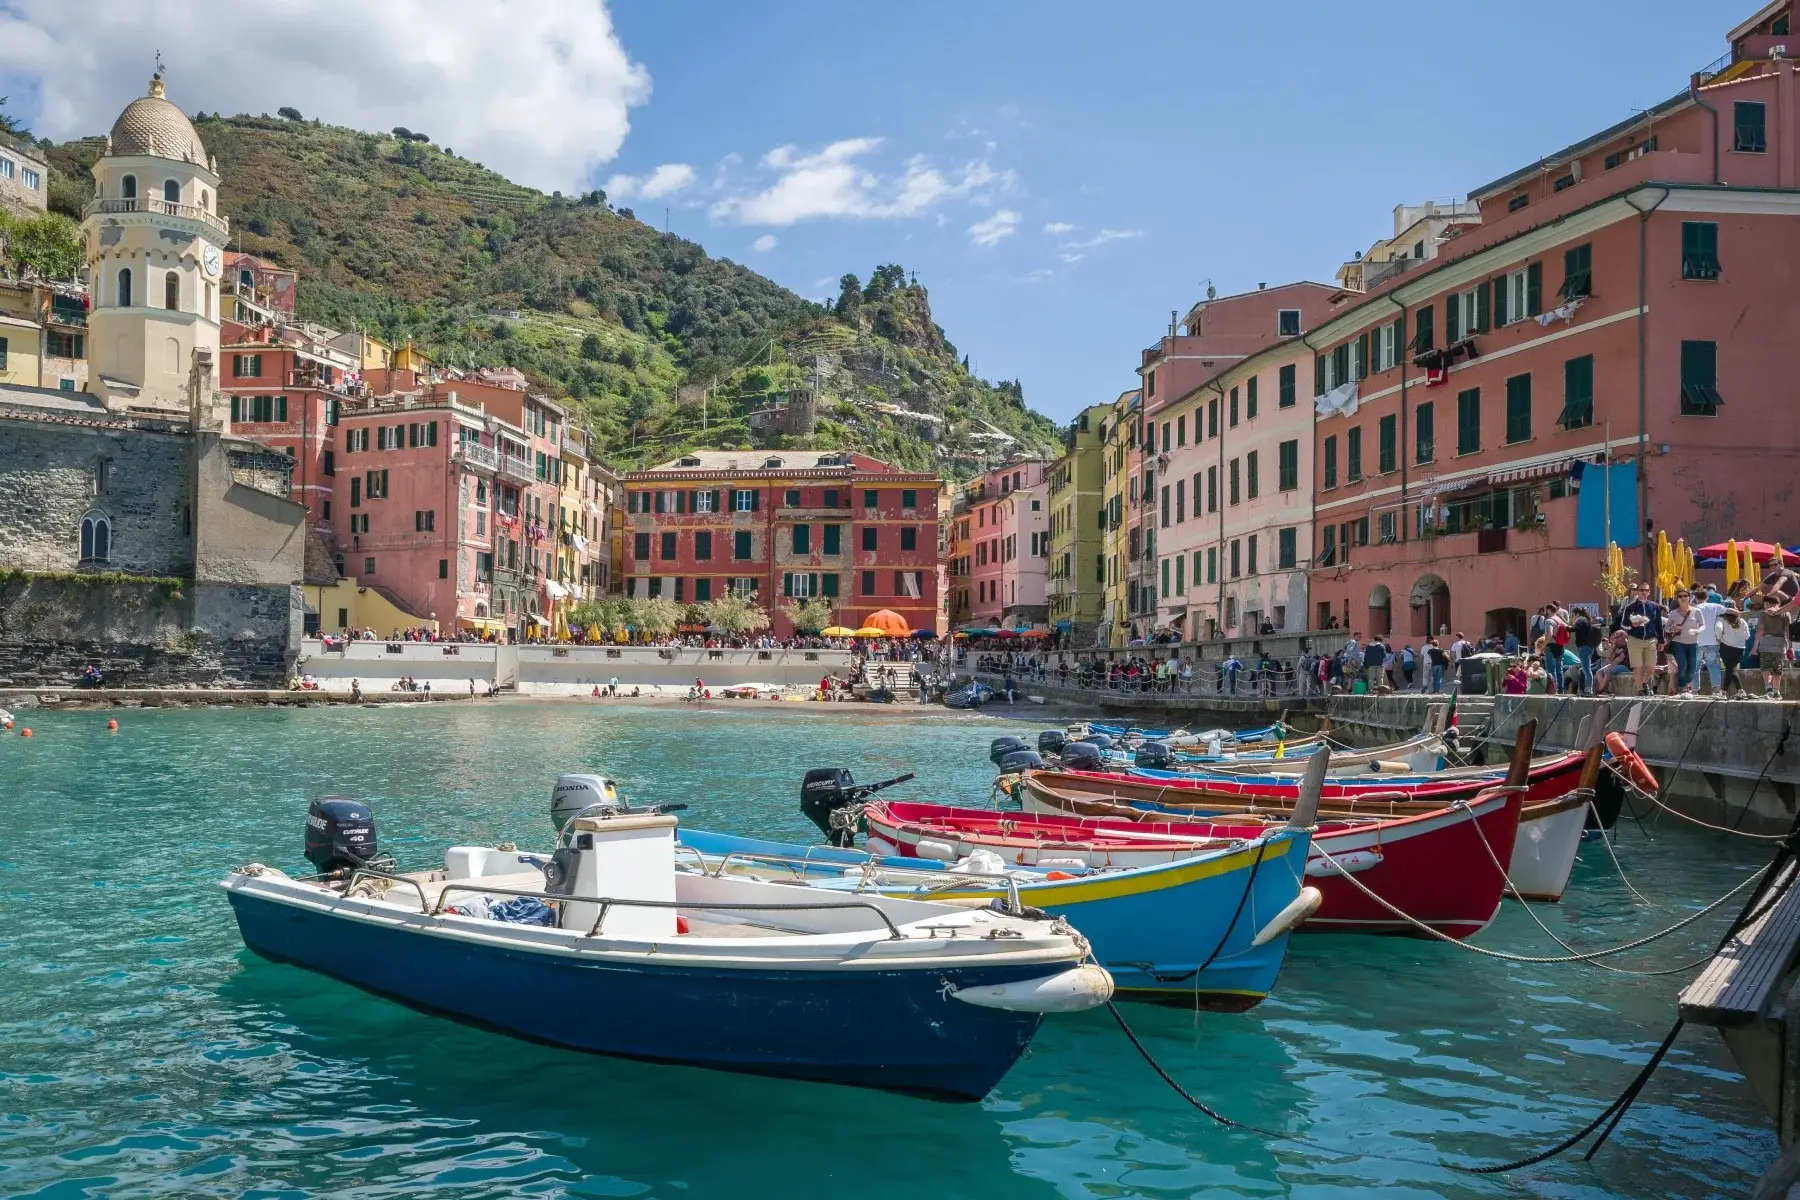 Colorful fishing boats moored in the crystal clear Mediterranean water at the historical town of Vernazza, Italy